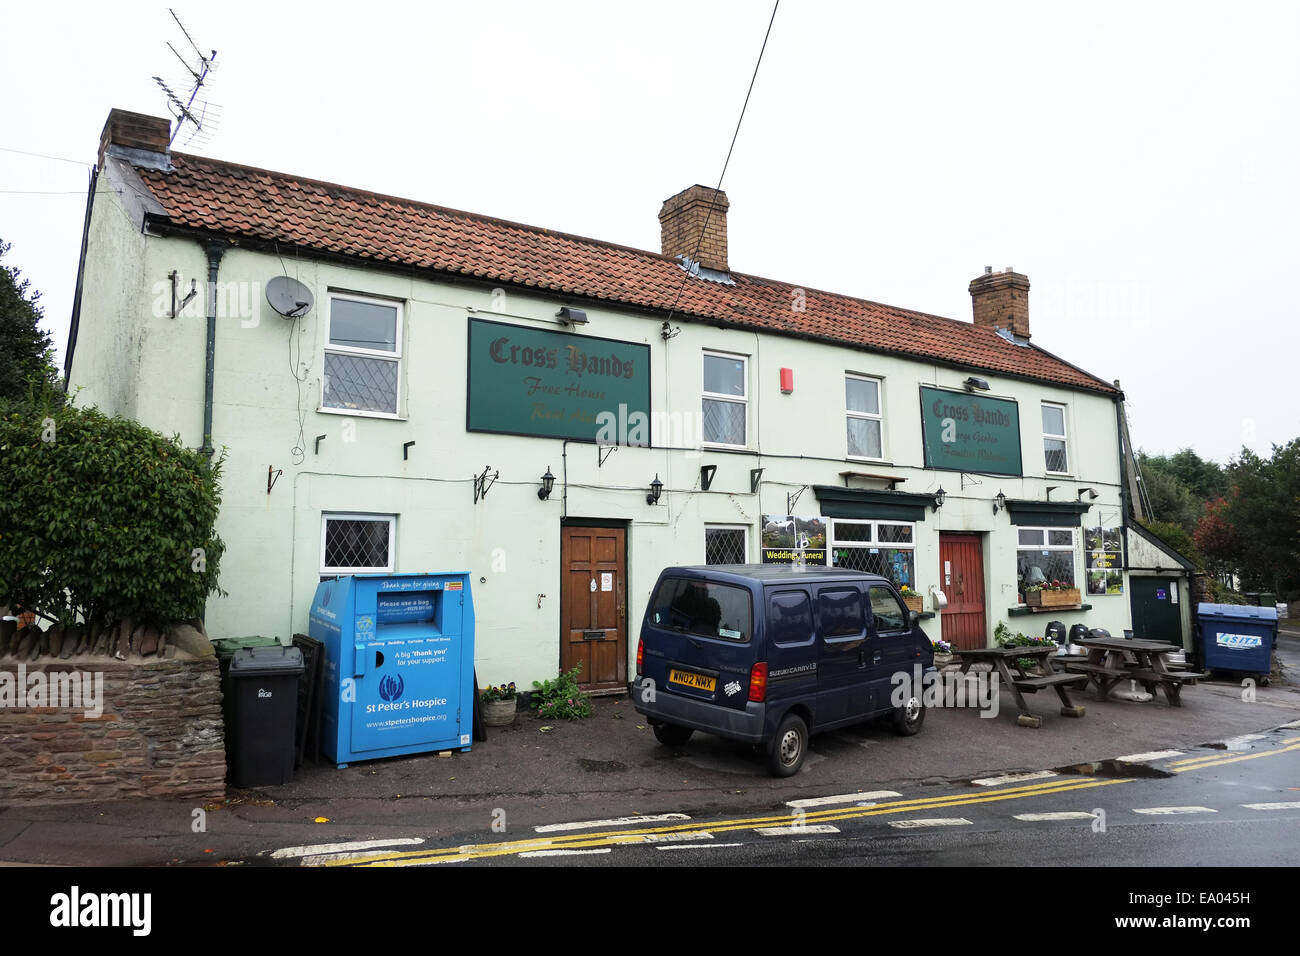 The cross hands pub in Winterbourne, South Gloucestershire. 29th October 2014 Stock Photo